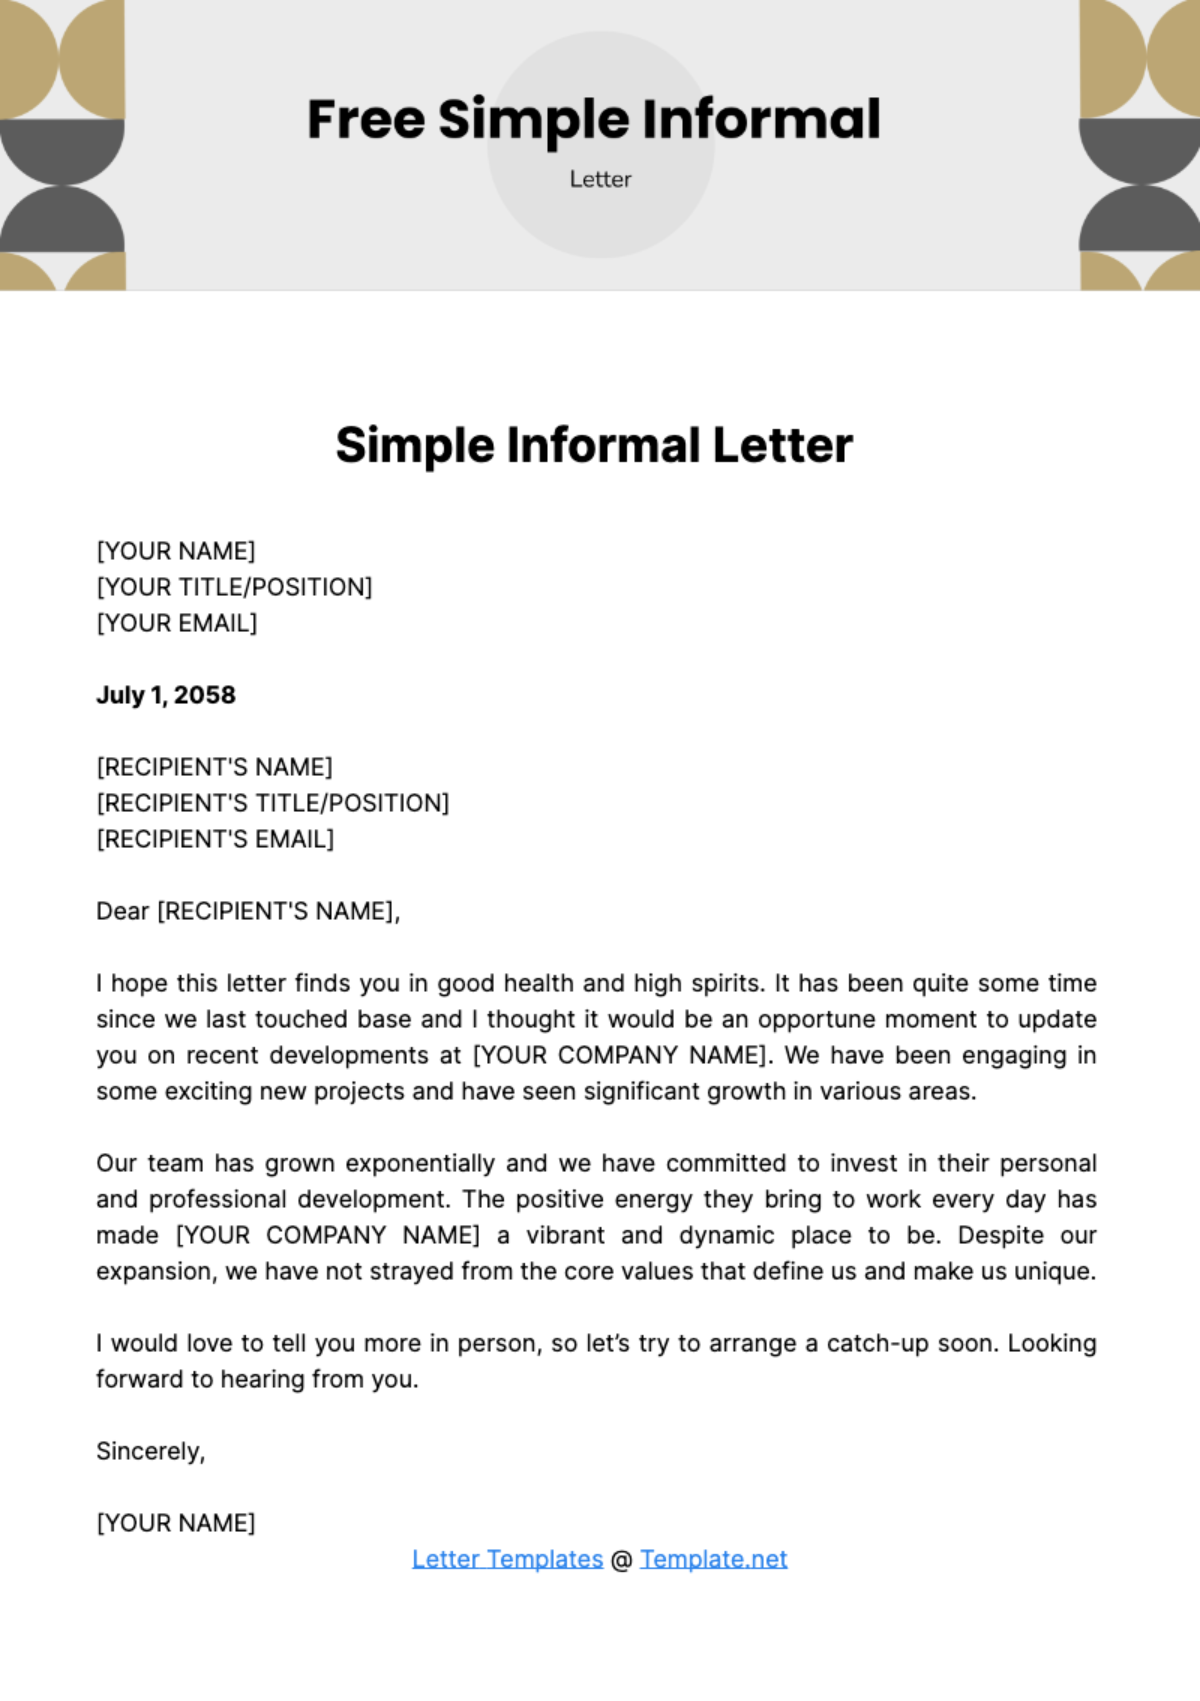 Free Simple Informal Letter Template